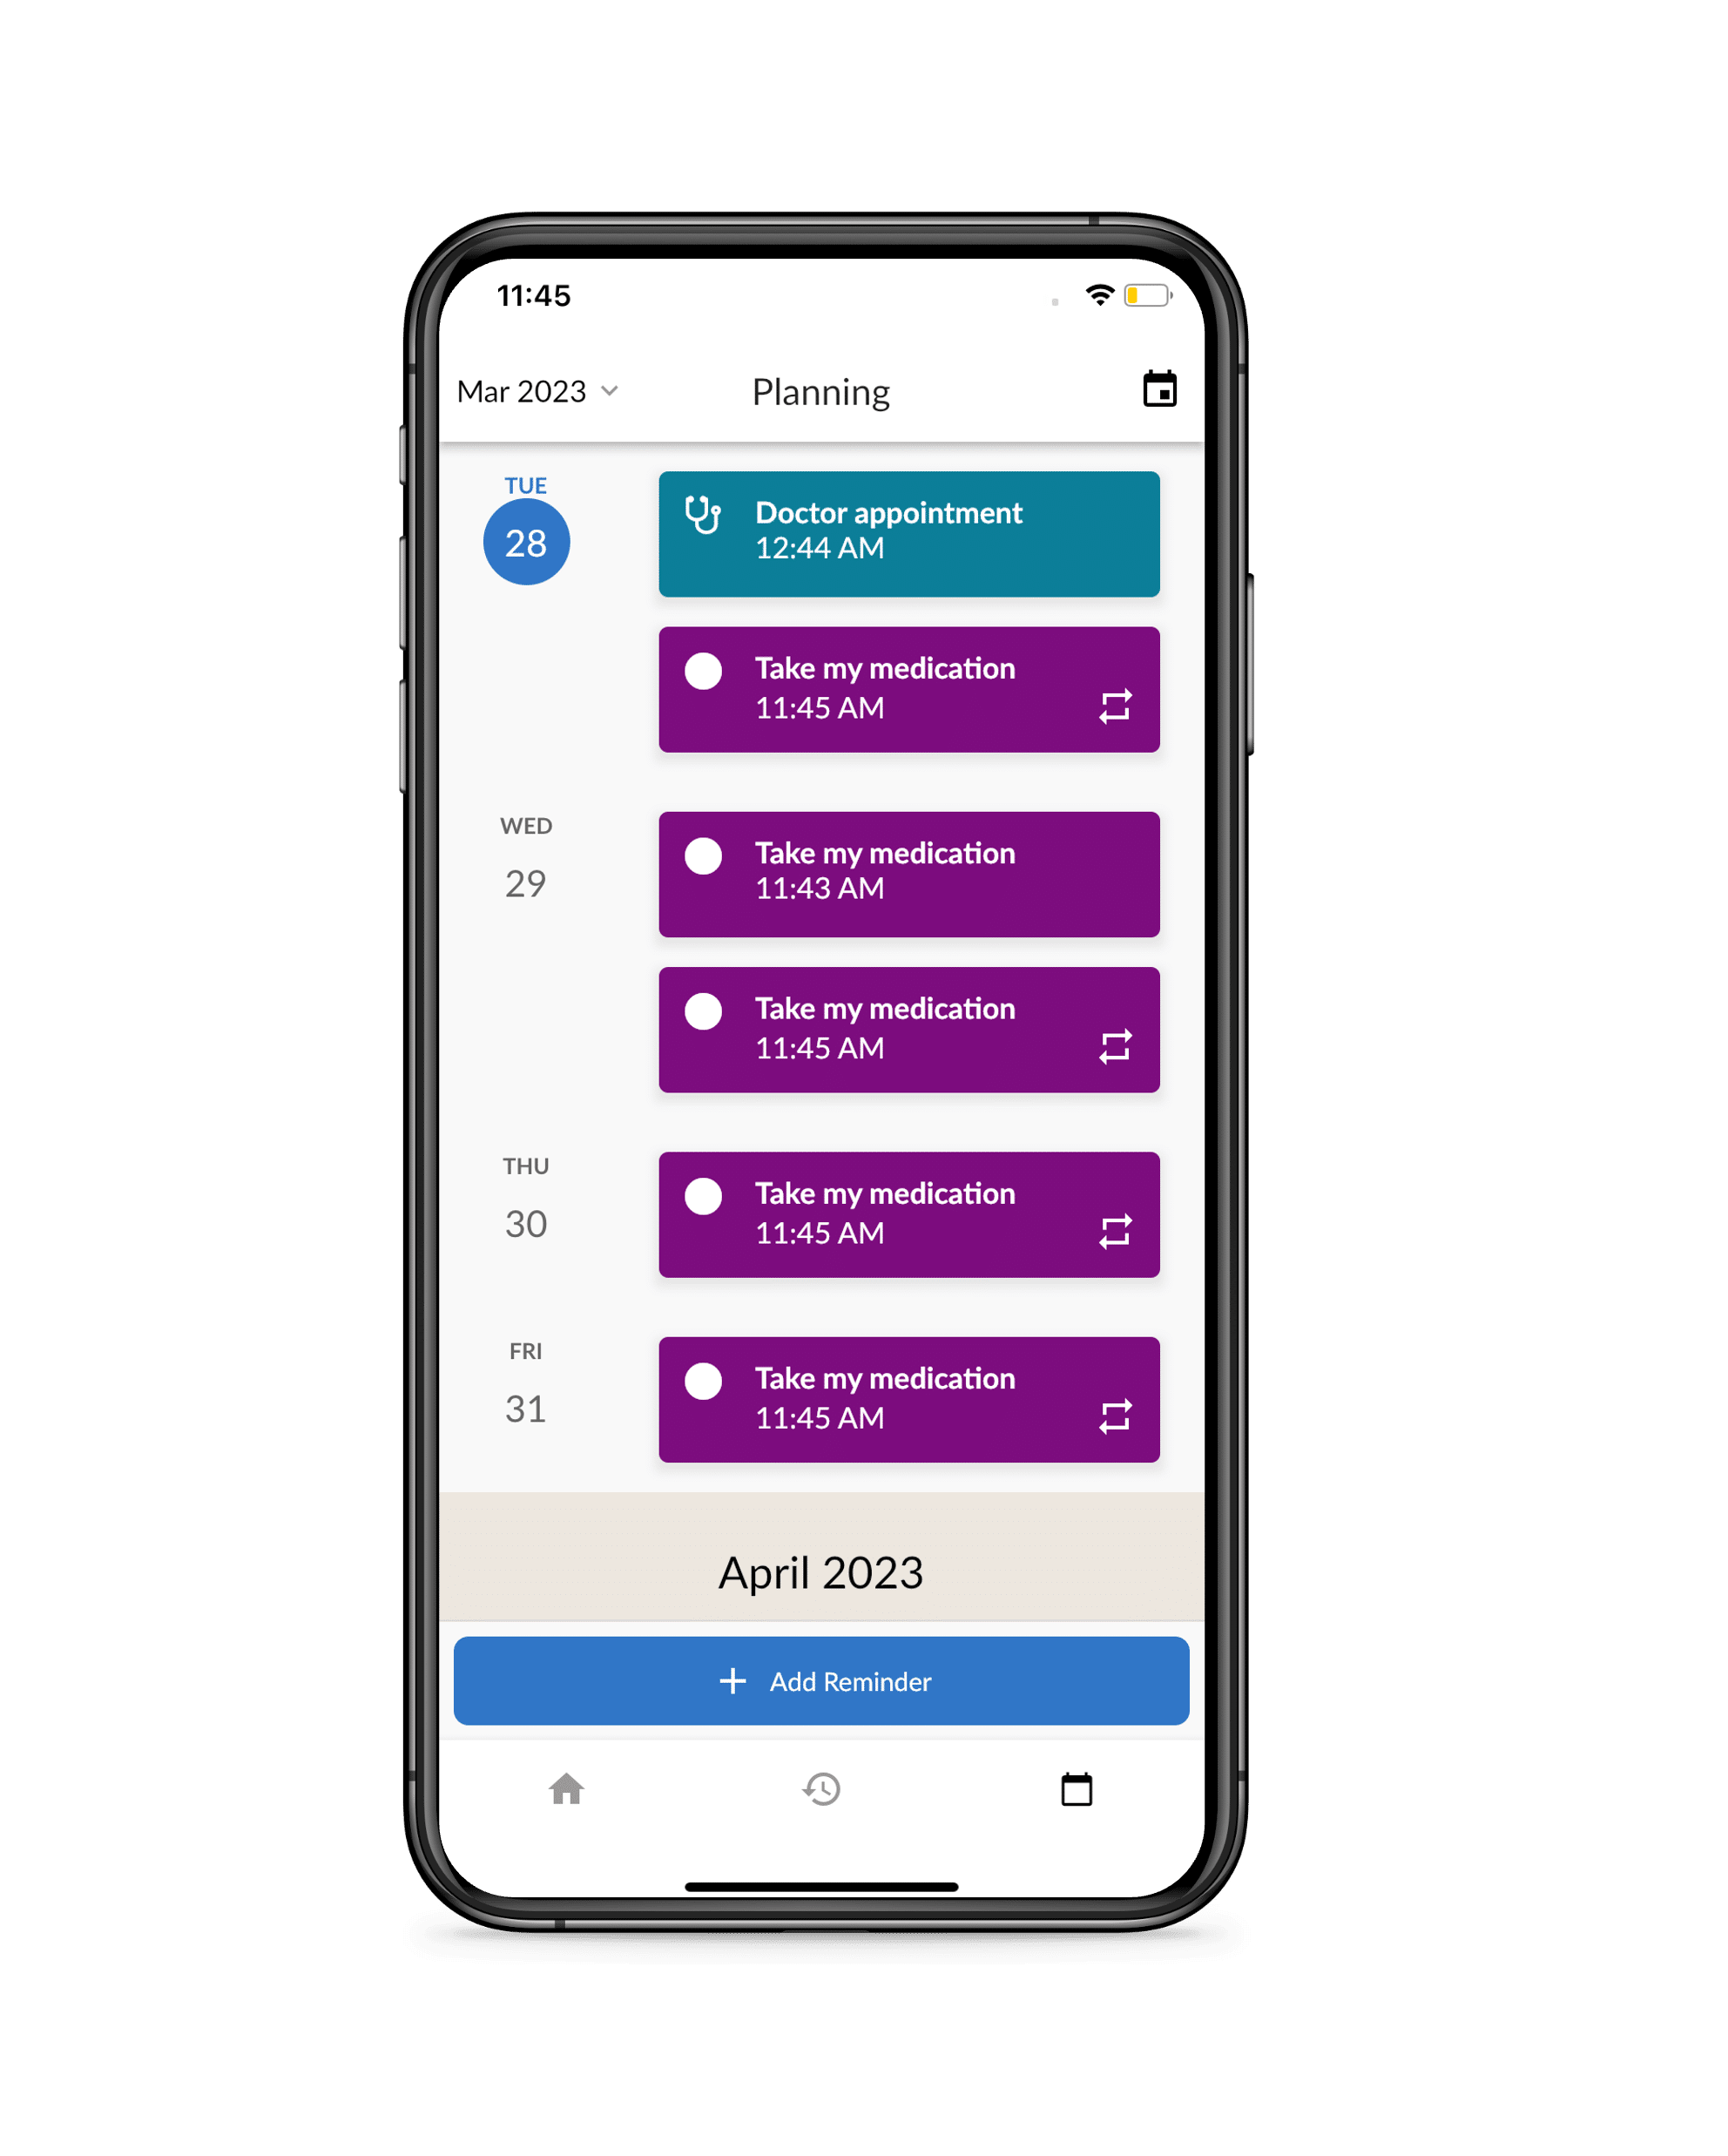 Illustration shows that the adherence app has the ability for patients to set reminders for site visits and medications.